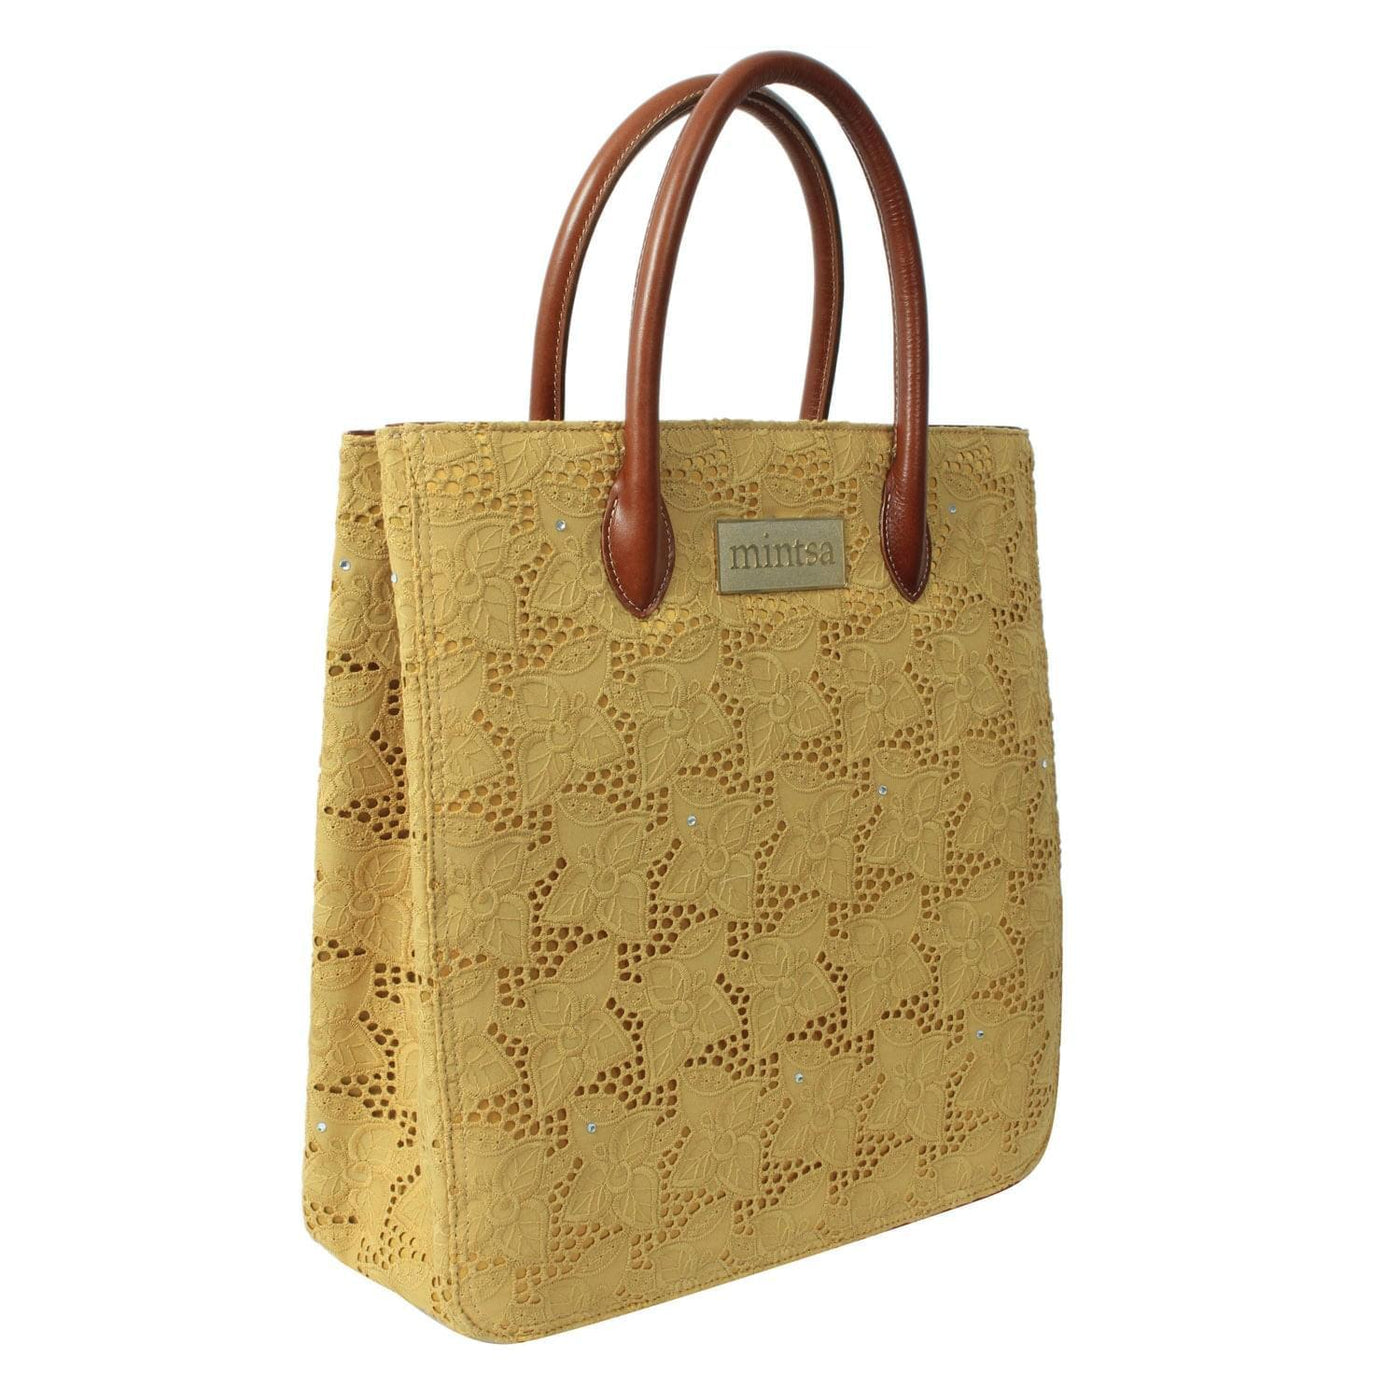 bSpecial Mustard Tote - Women's tote bag for everyday use